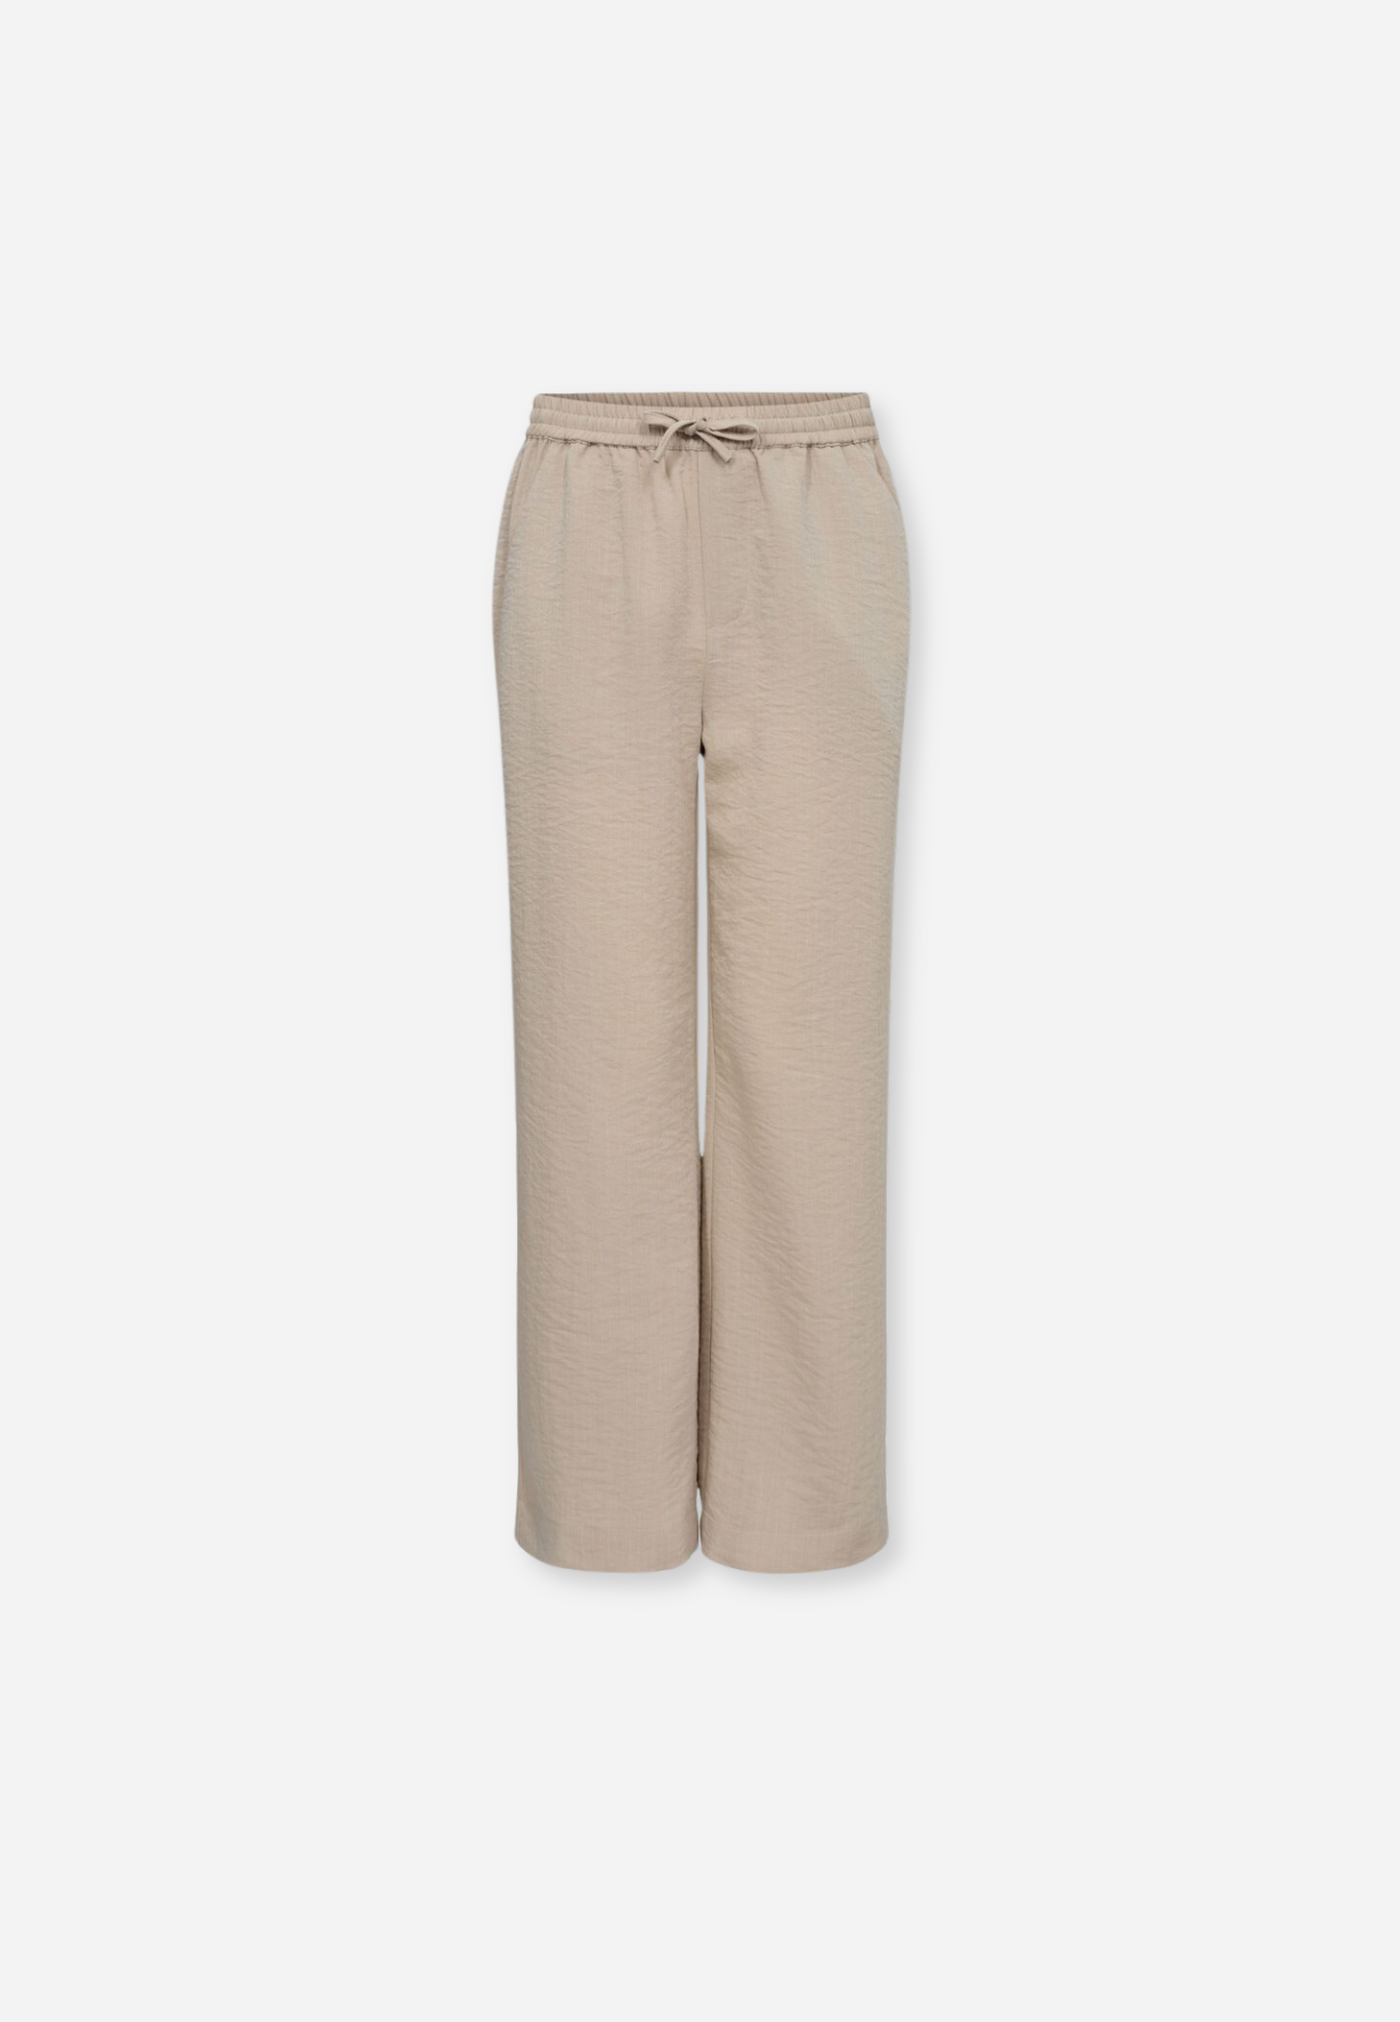 TROUSERS - SAND